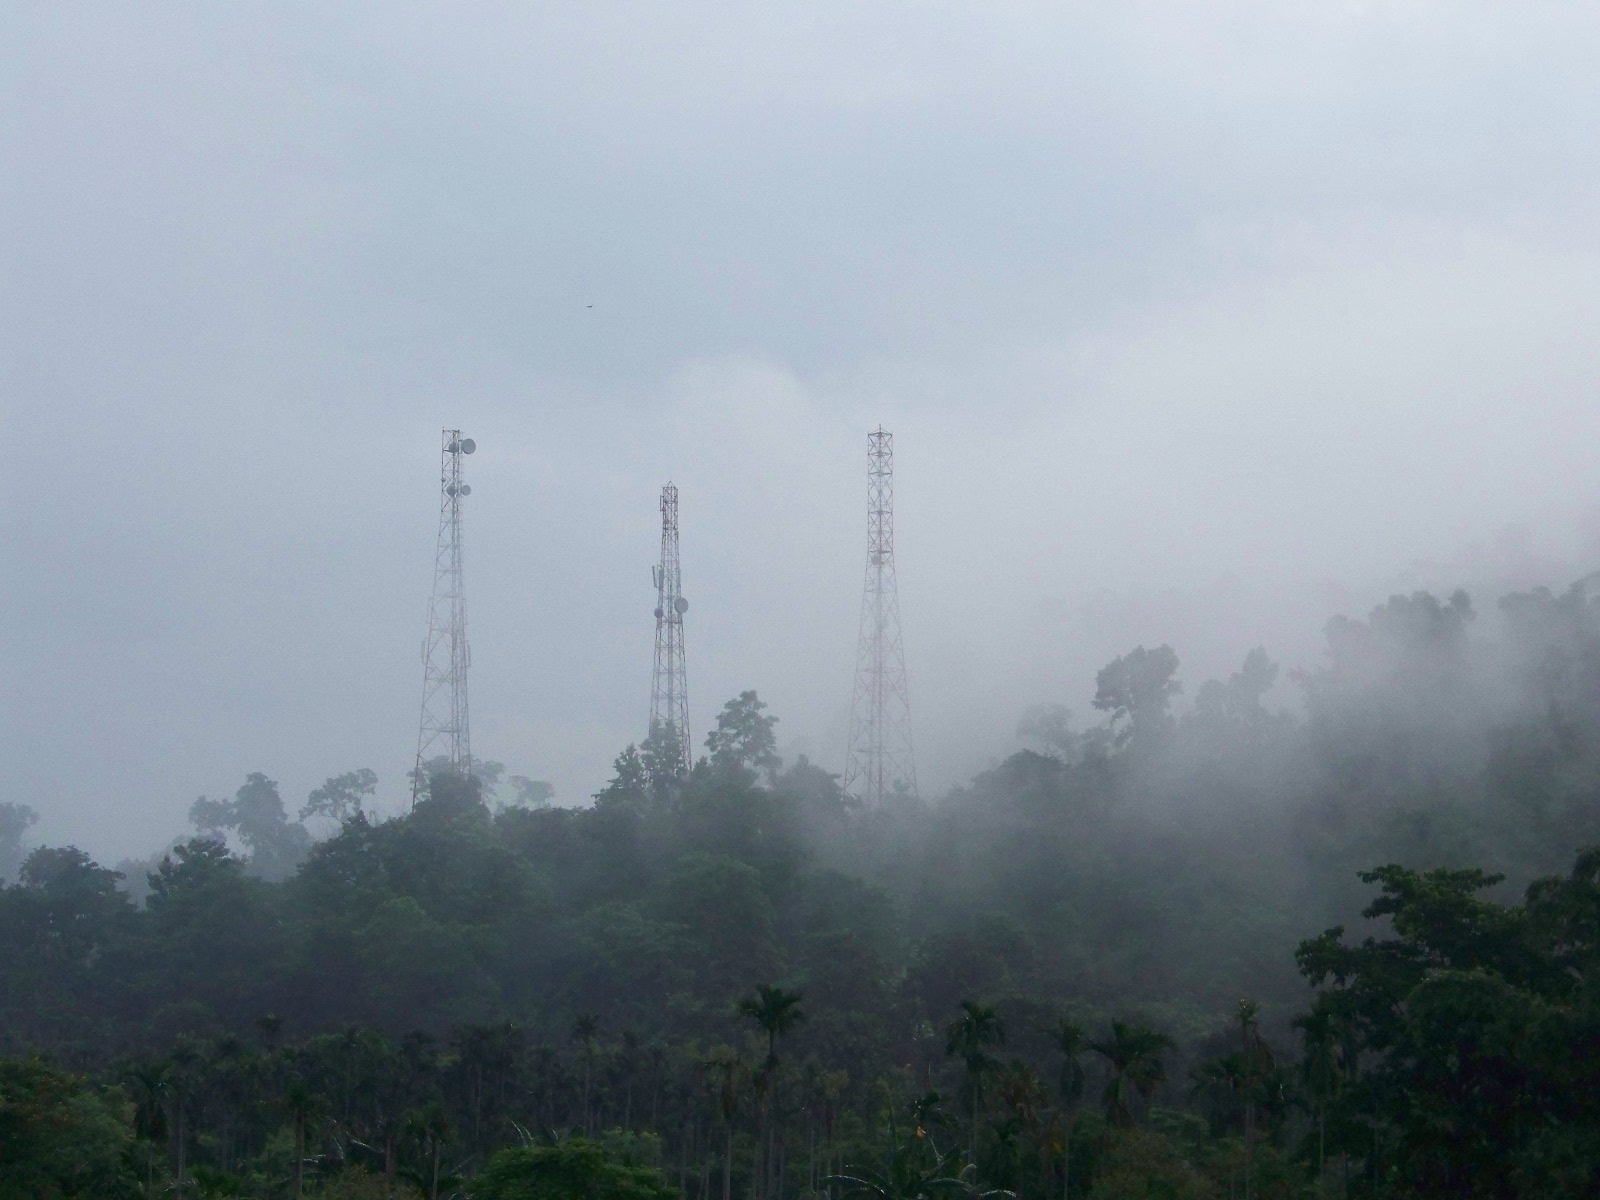 Microwave and cell towers on a Garo hillside.